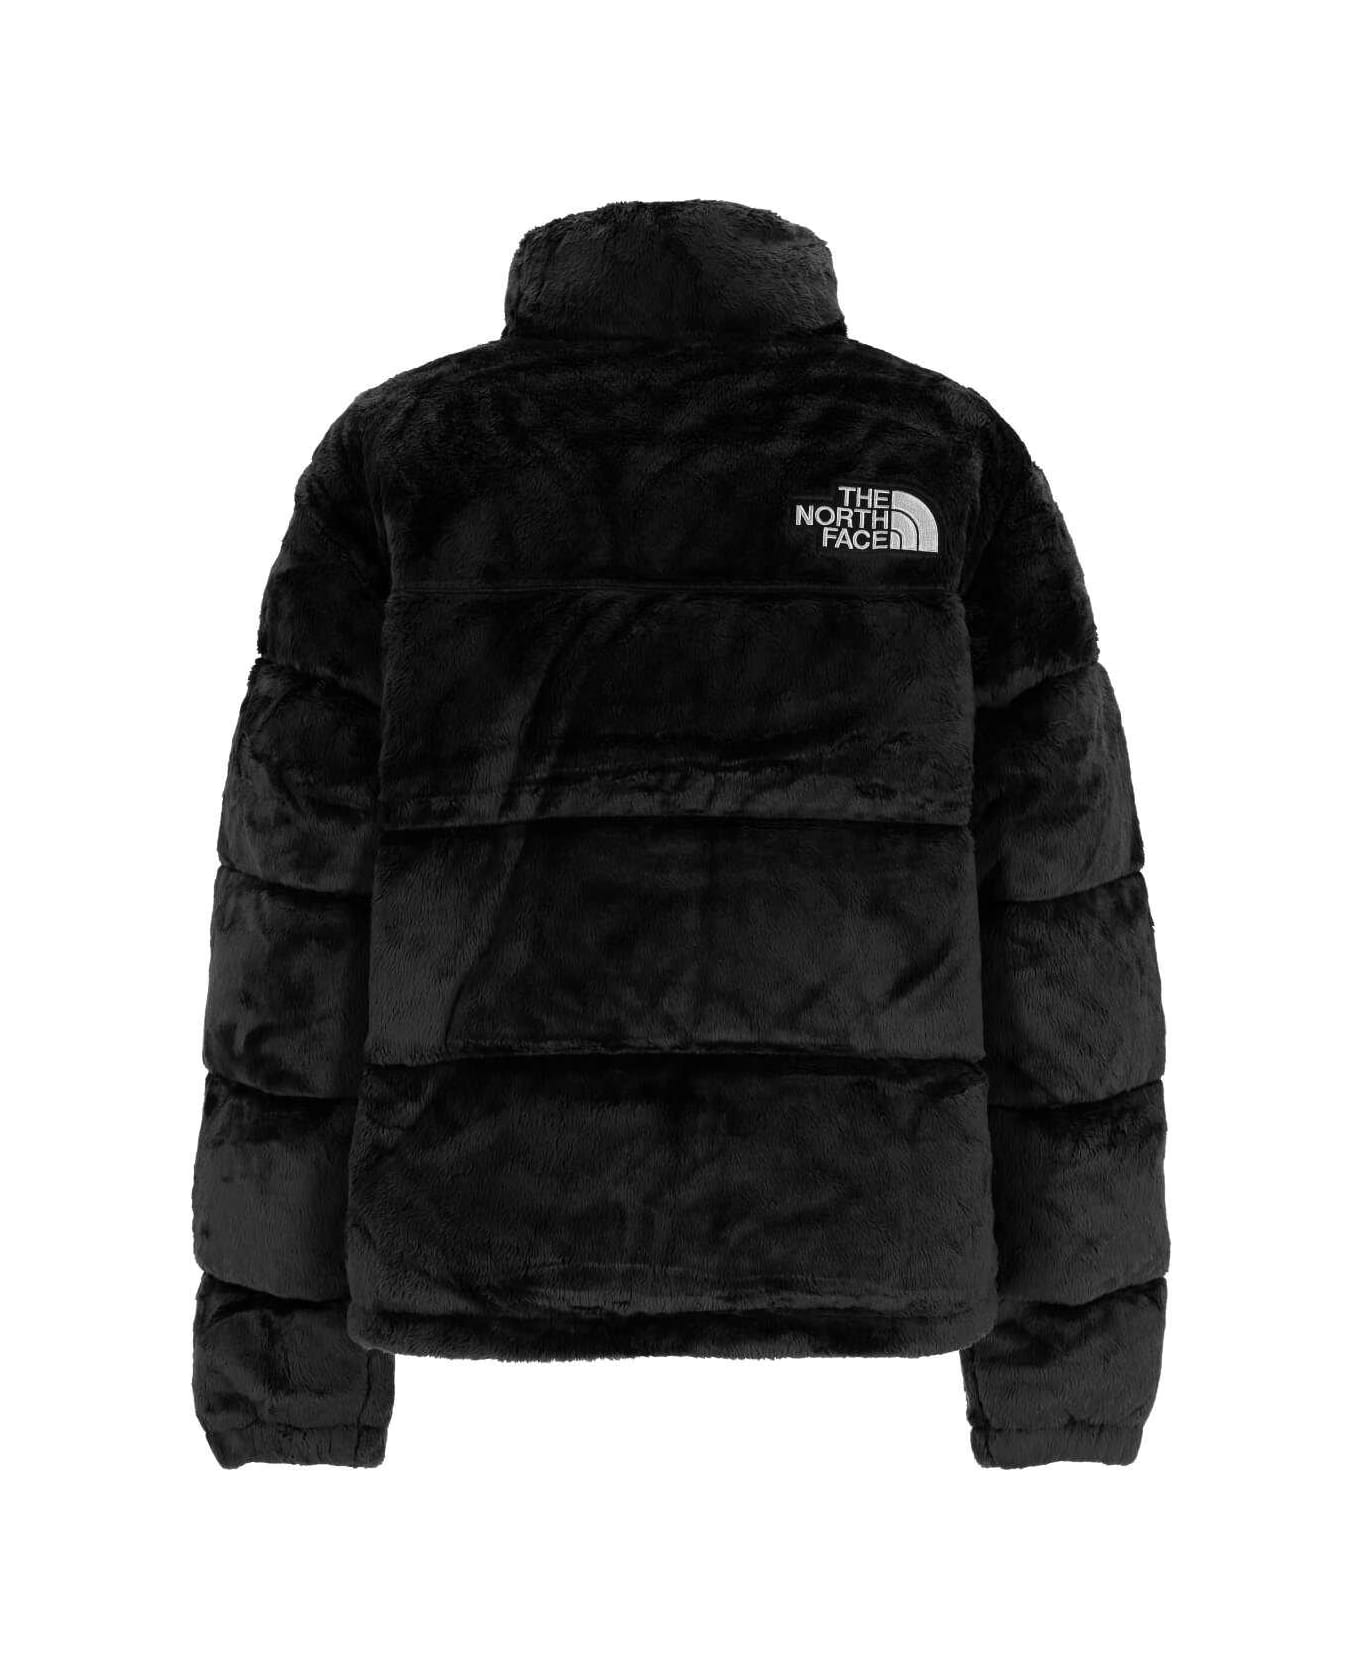 The North Face Logo Embroidered Funnel-neck Jacket - Black